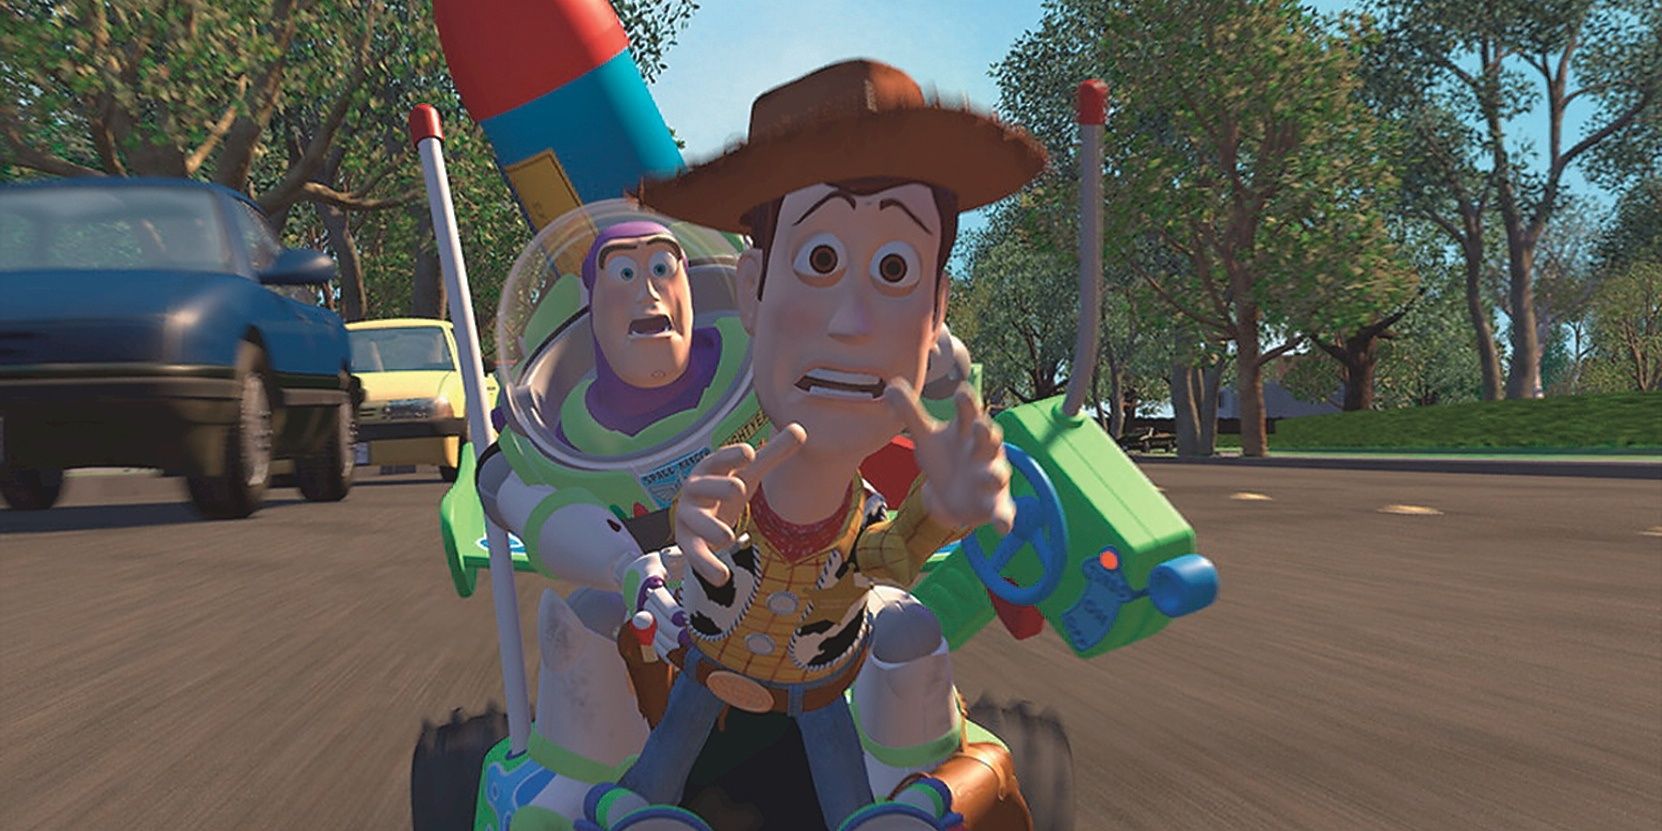 Woody and Buzz ride a toy car to catch up with Andy's moving truck